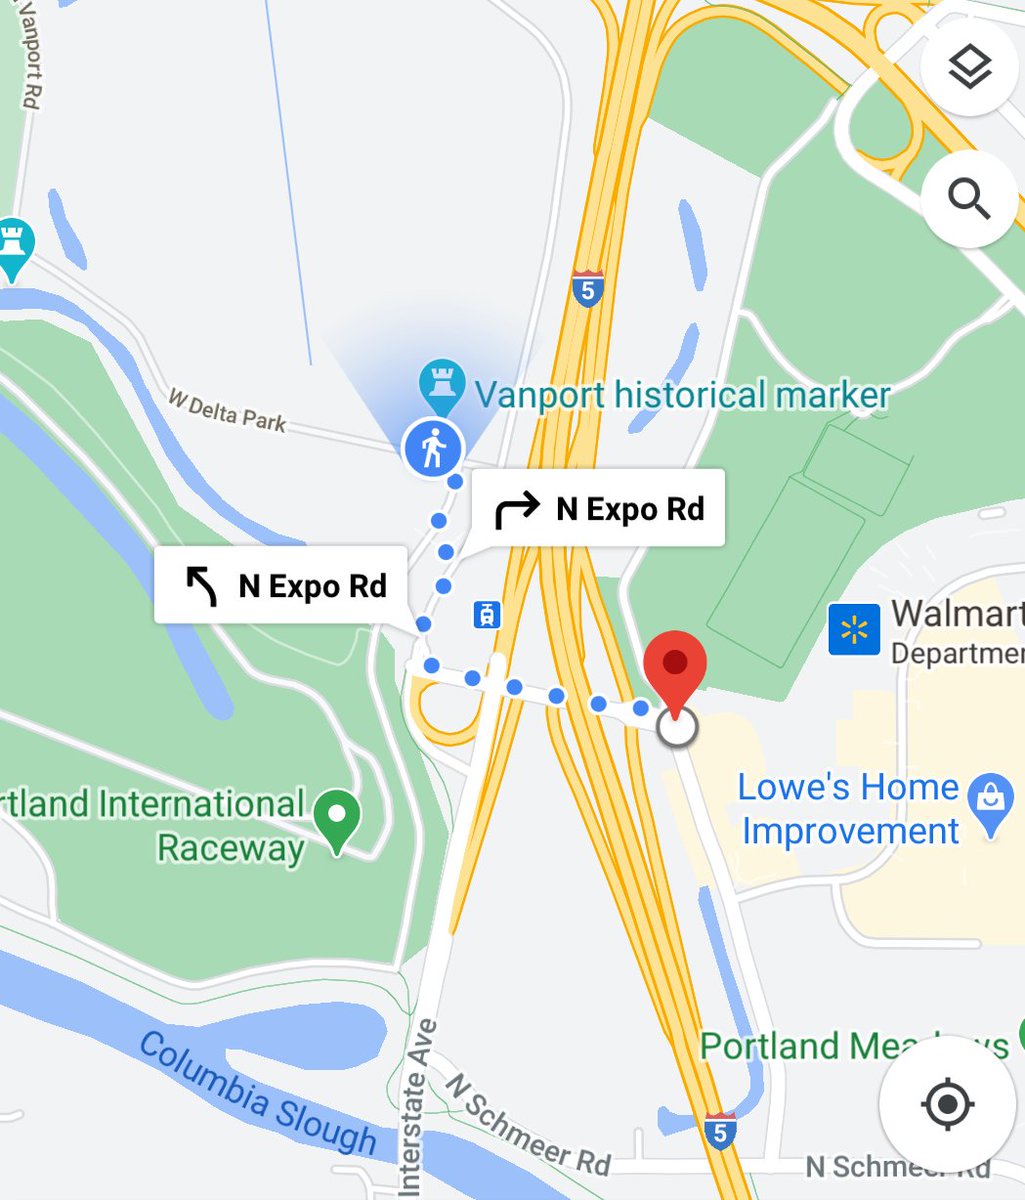 This location is a 9 minute walk to Delta Park, if one was inclined to walk over to a larger group of armed far-right extremists who have made no secret of their desire to murder Black Lives Matter activists